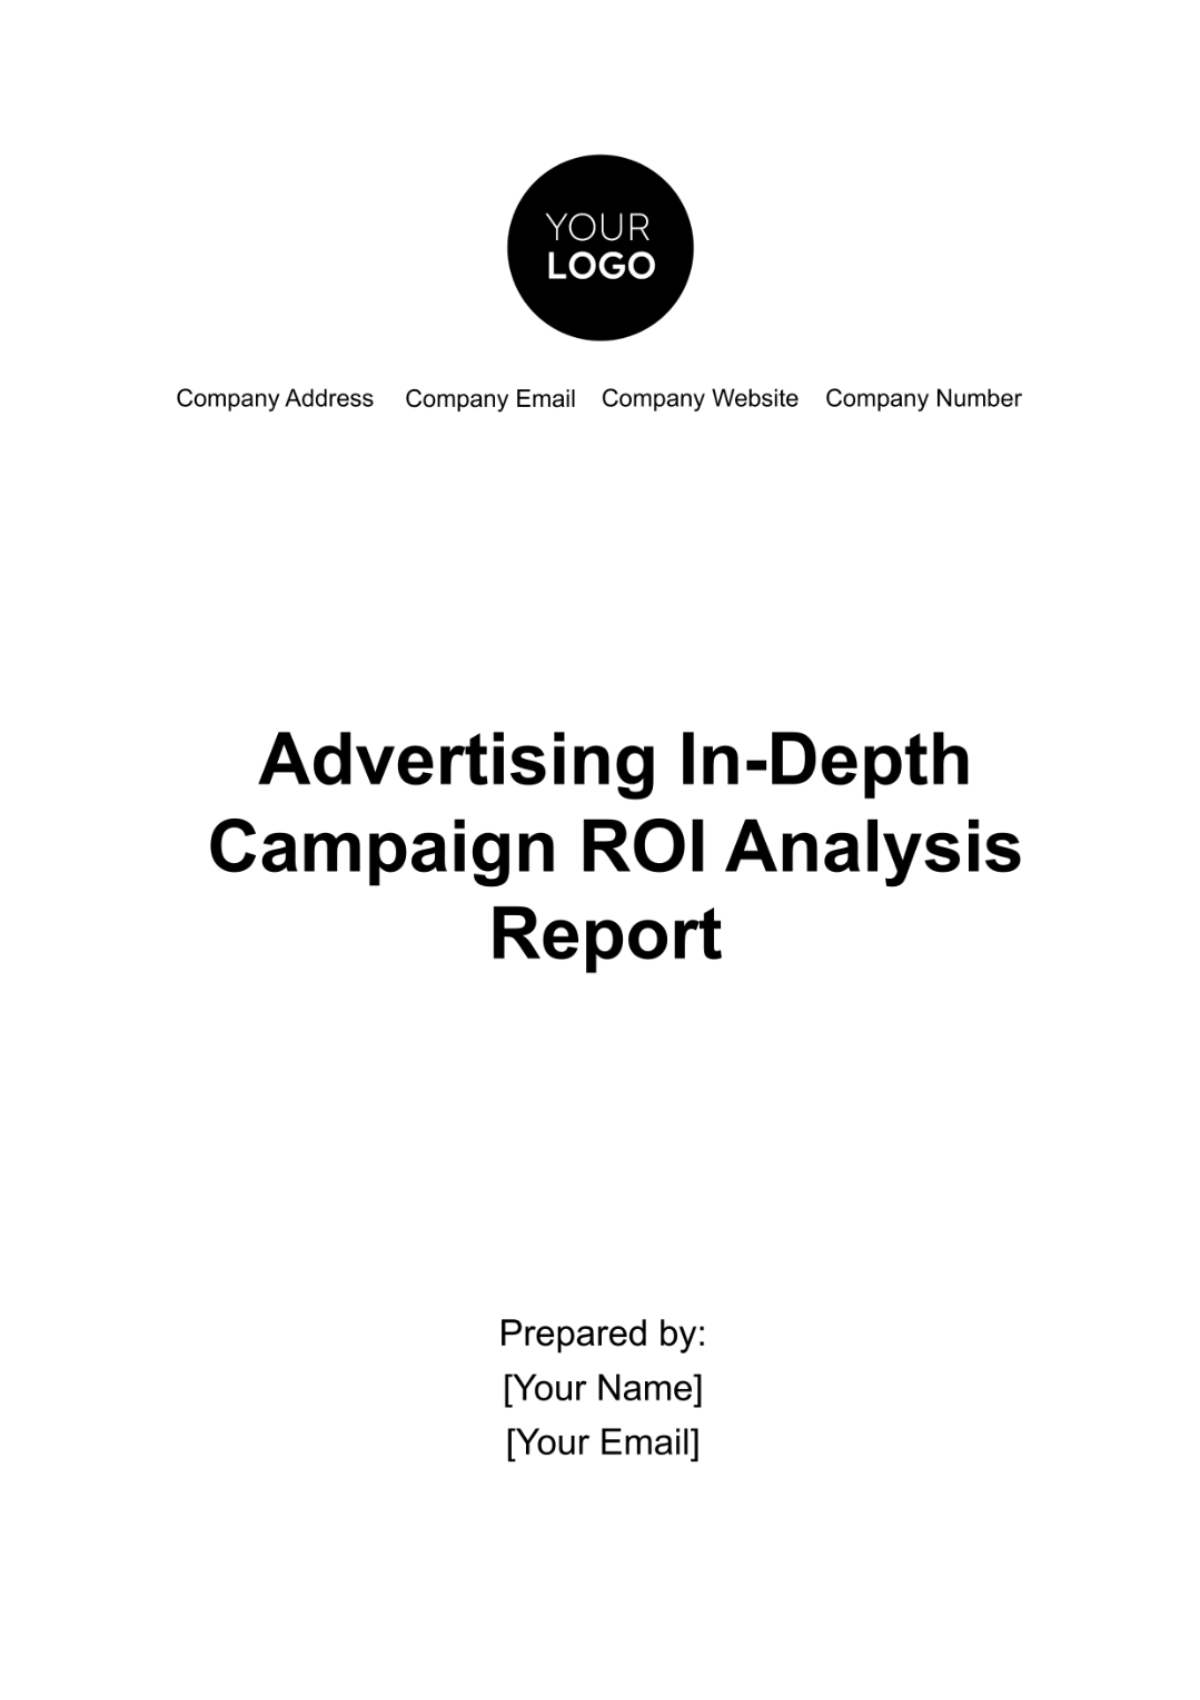 Advertising In-Depth Campaign ROI Analysis Report Template